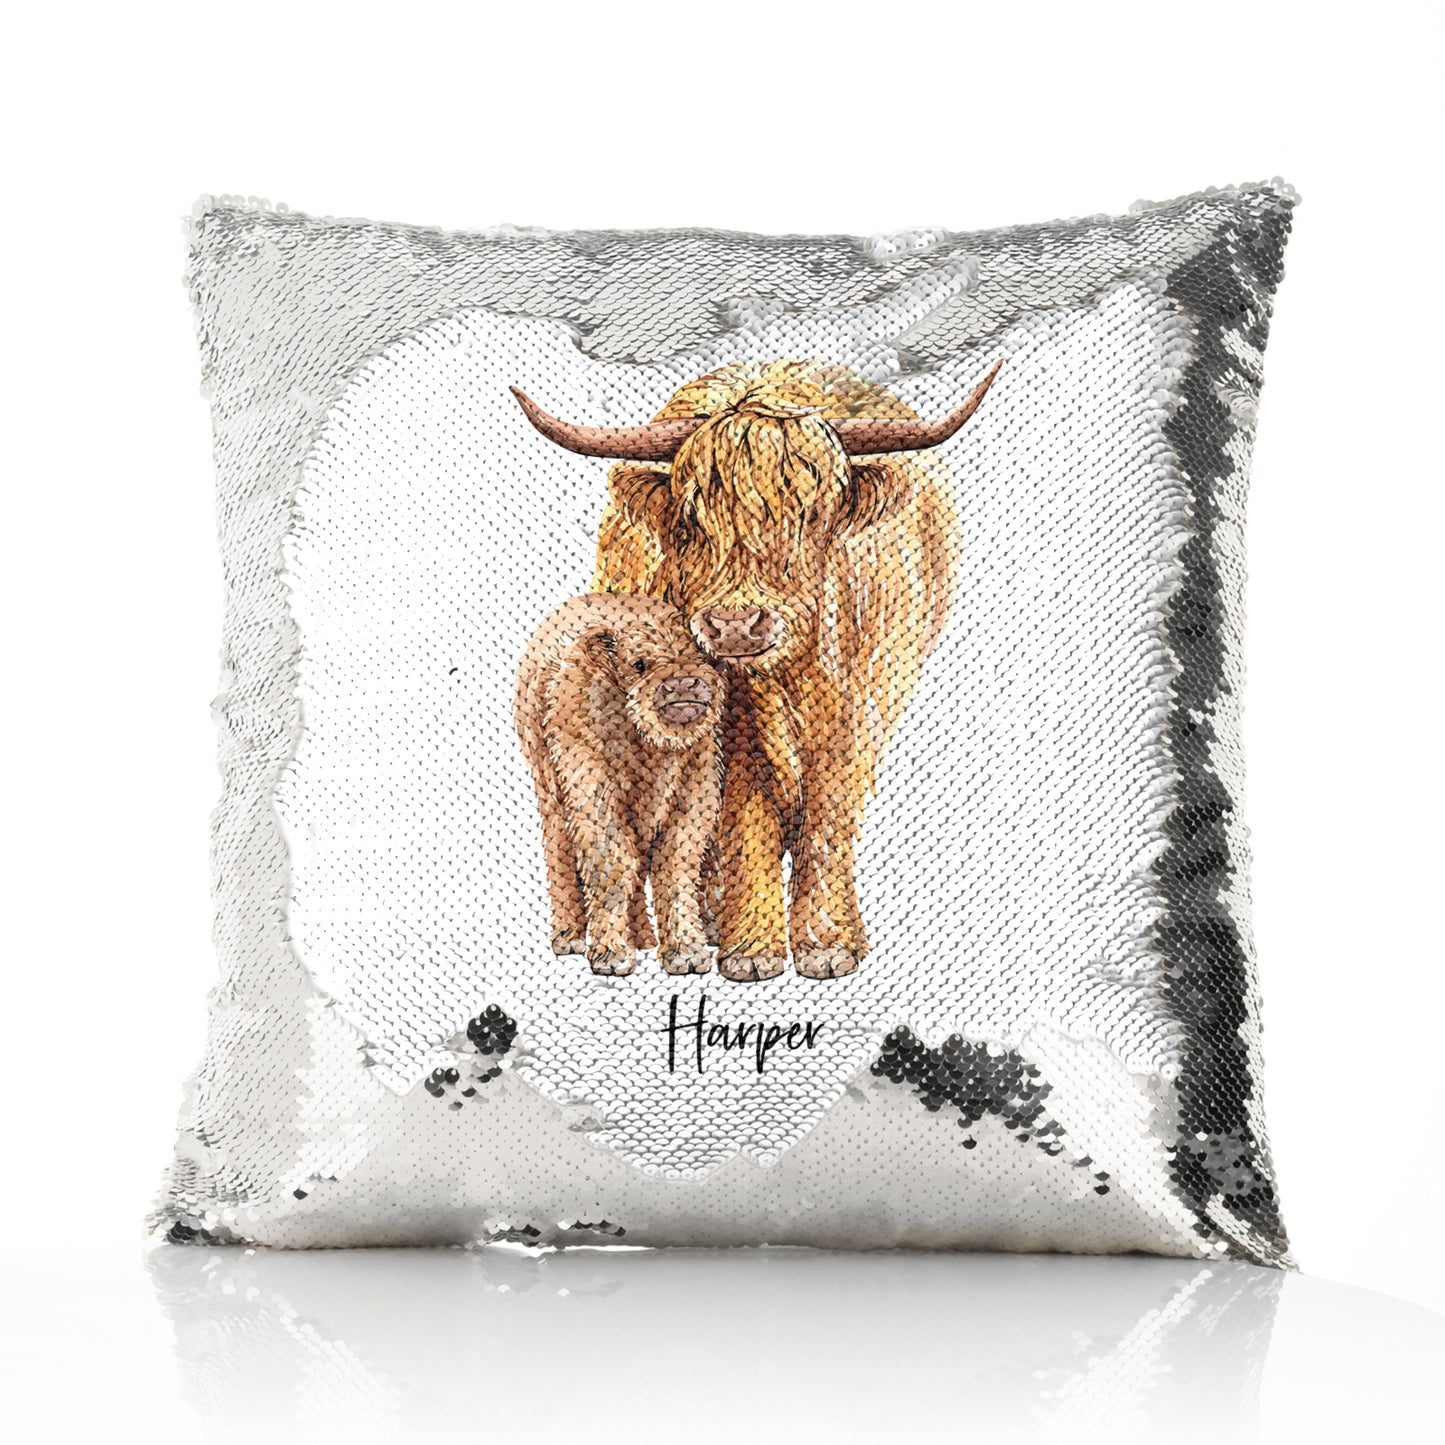 Personalised Sequin Cushion with Welcoming Text and Relaxing Mum and Baby Highland Cows